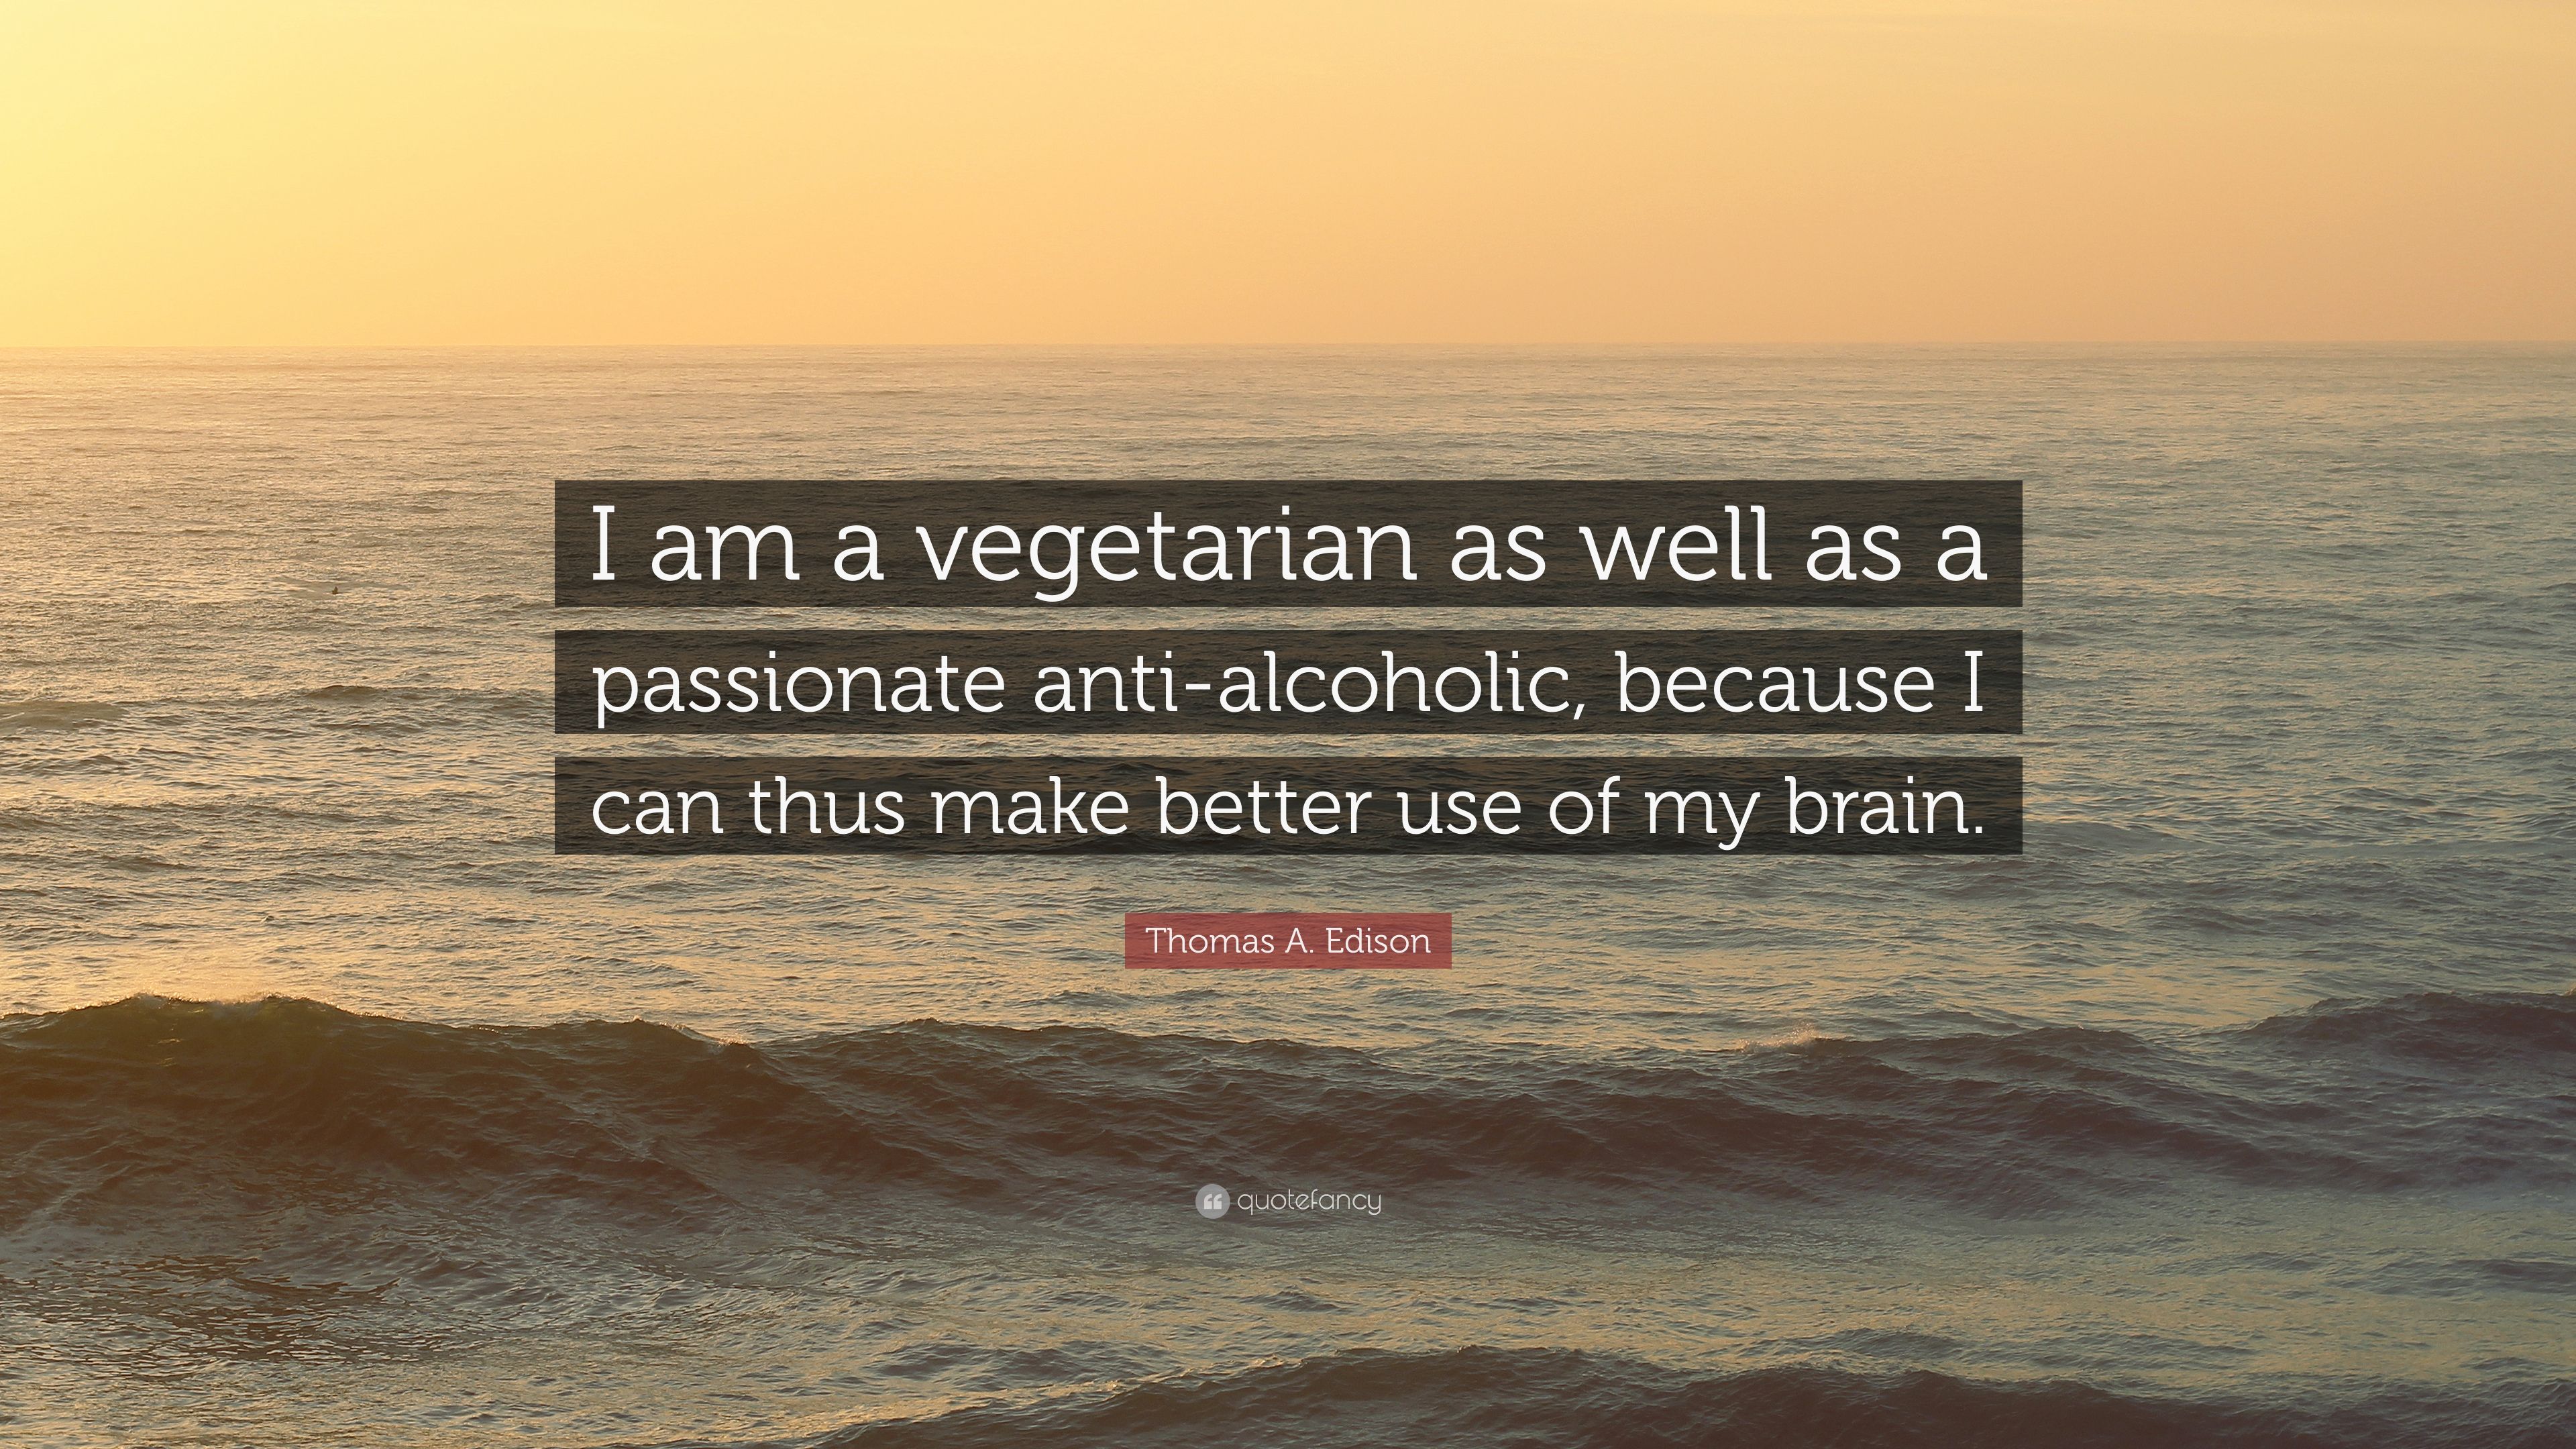 Thomas A. Edison Quote: “I am a vegetarian as well as a passionate